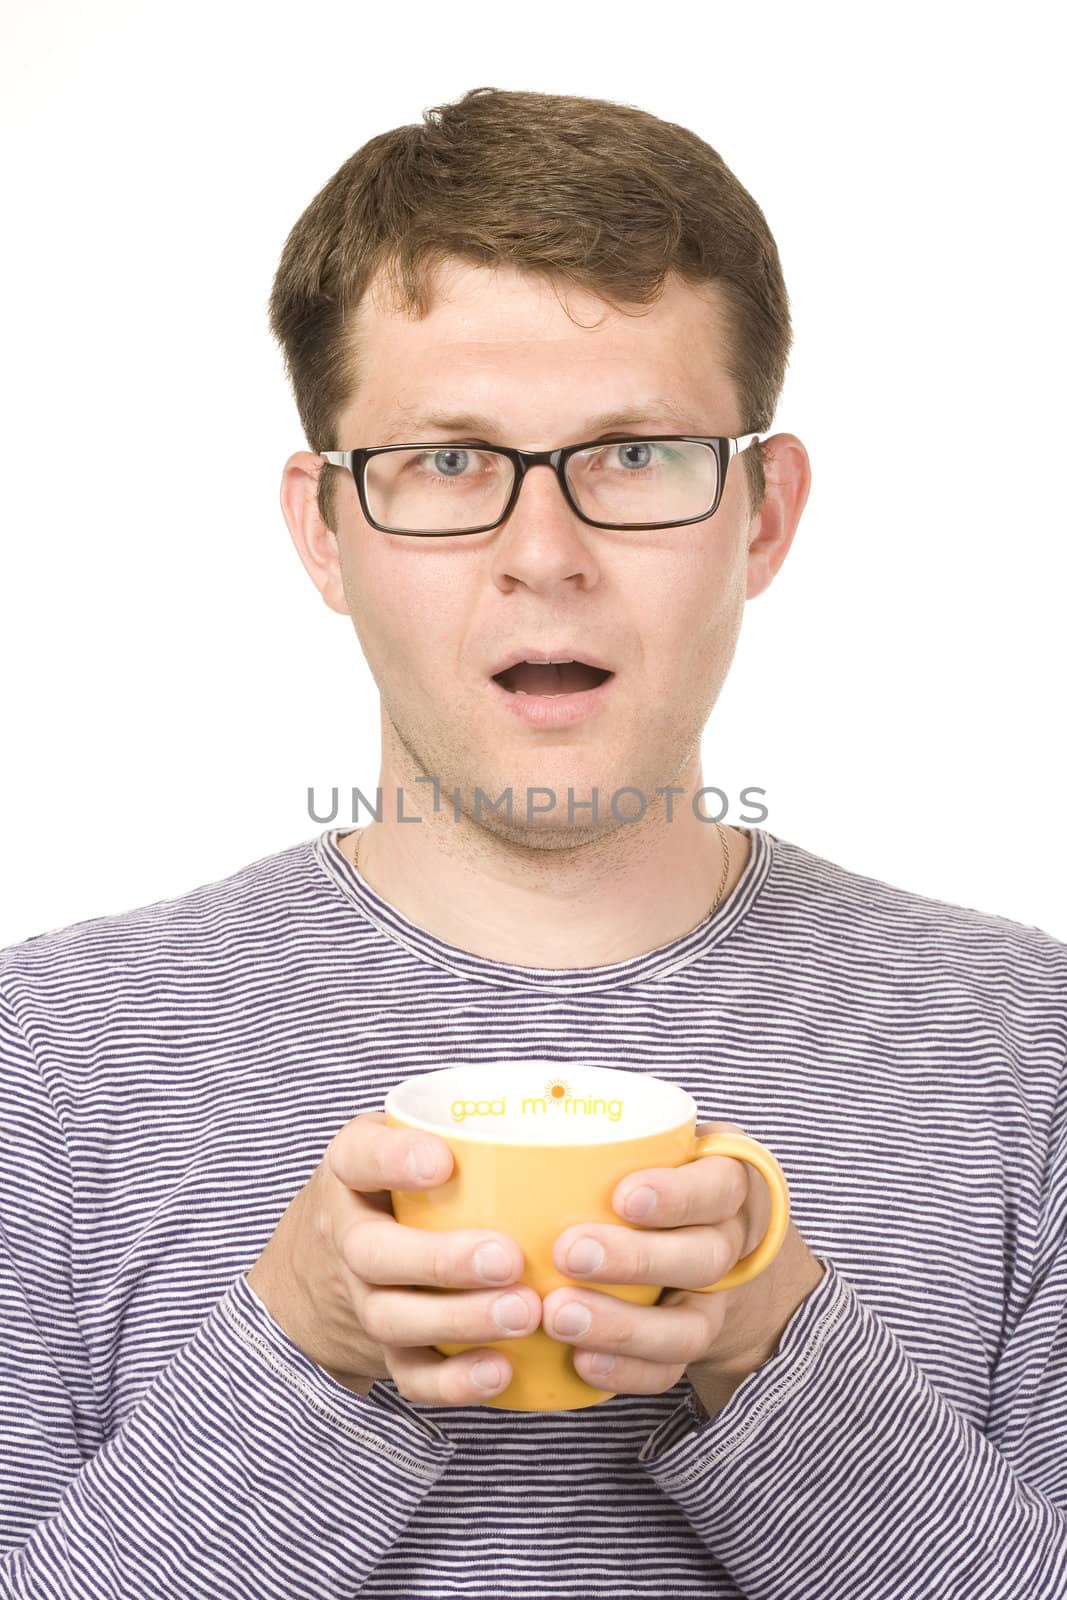 surprised man with yellow cup